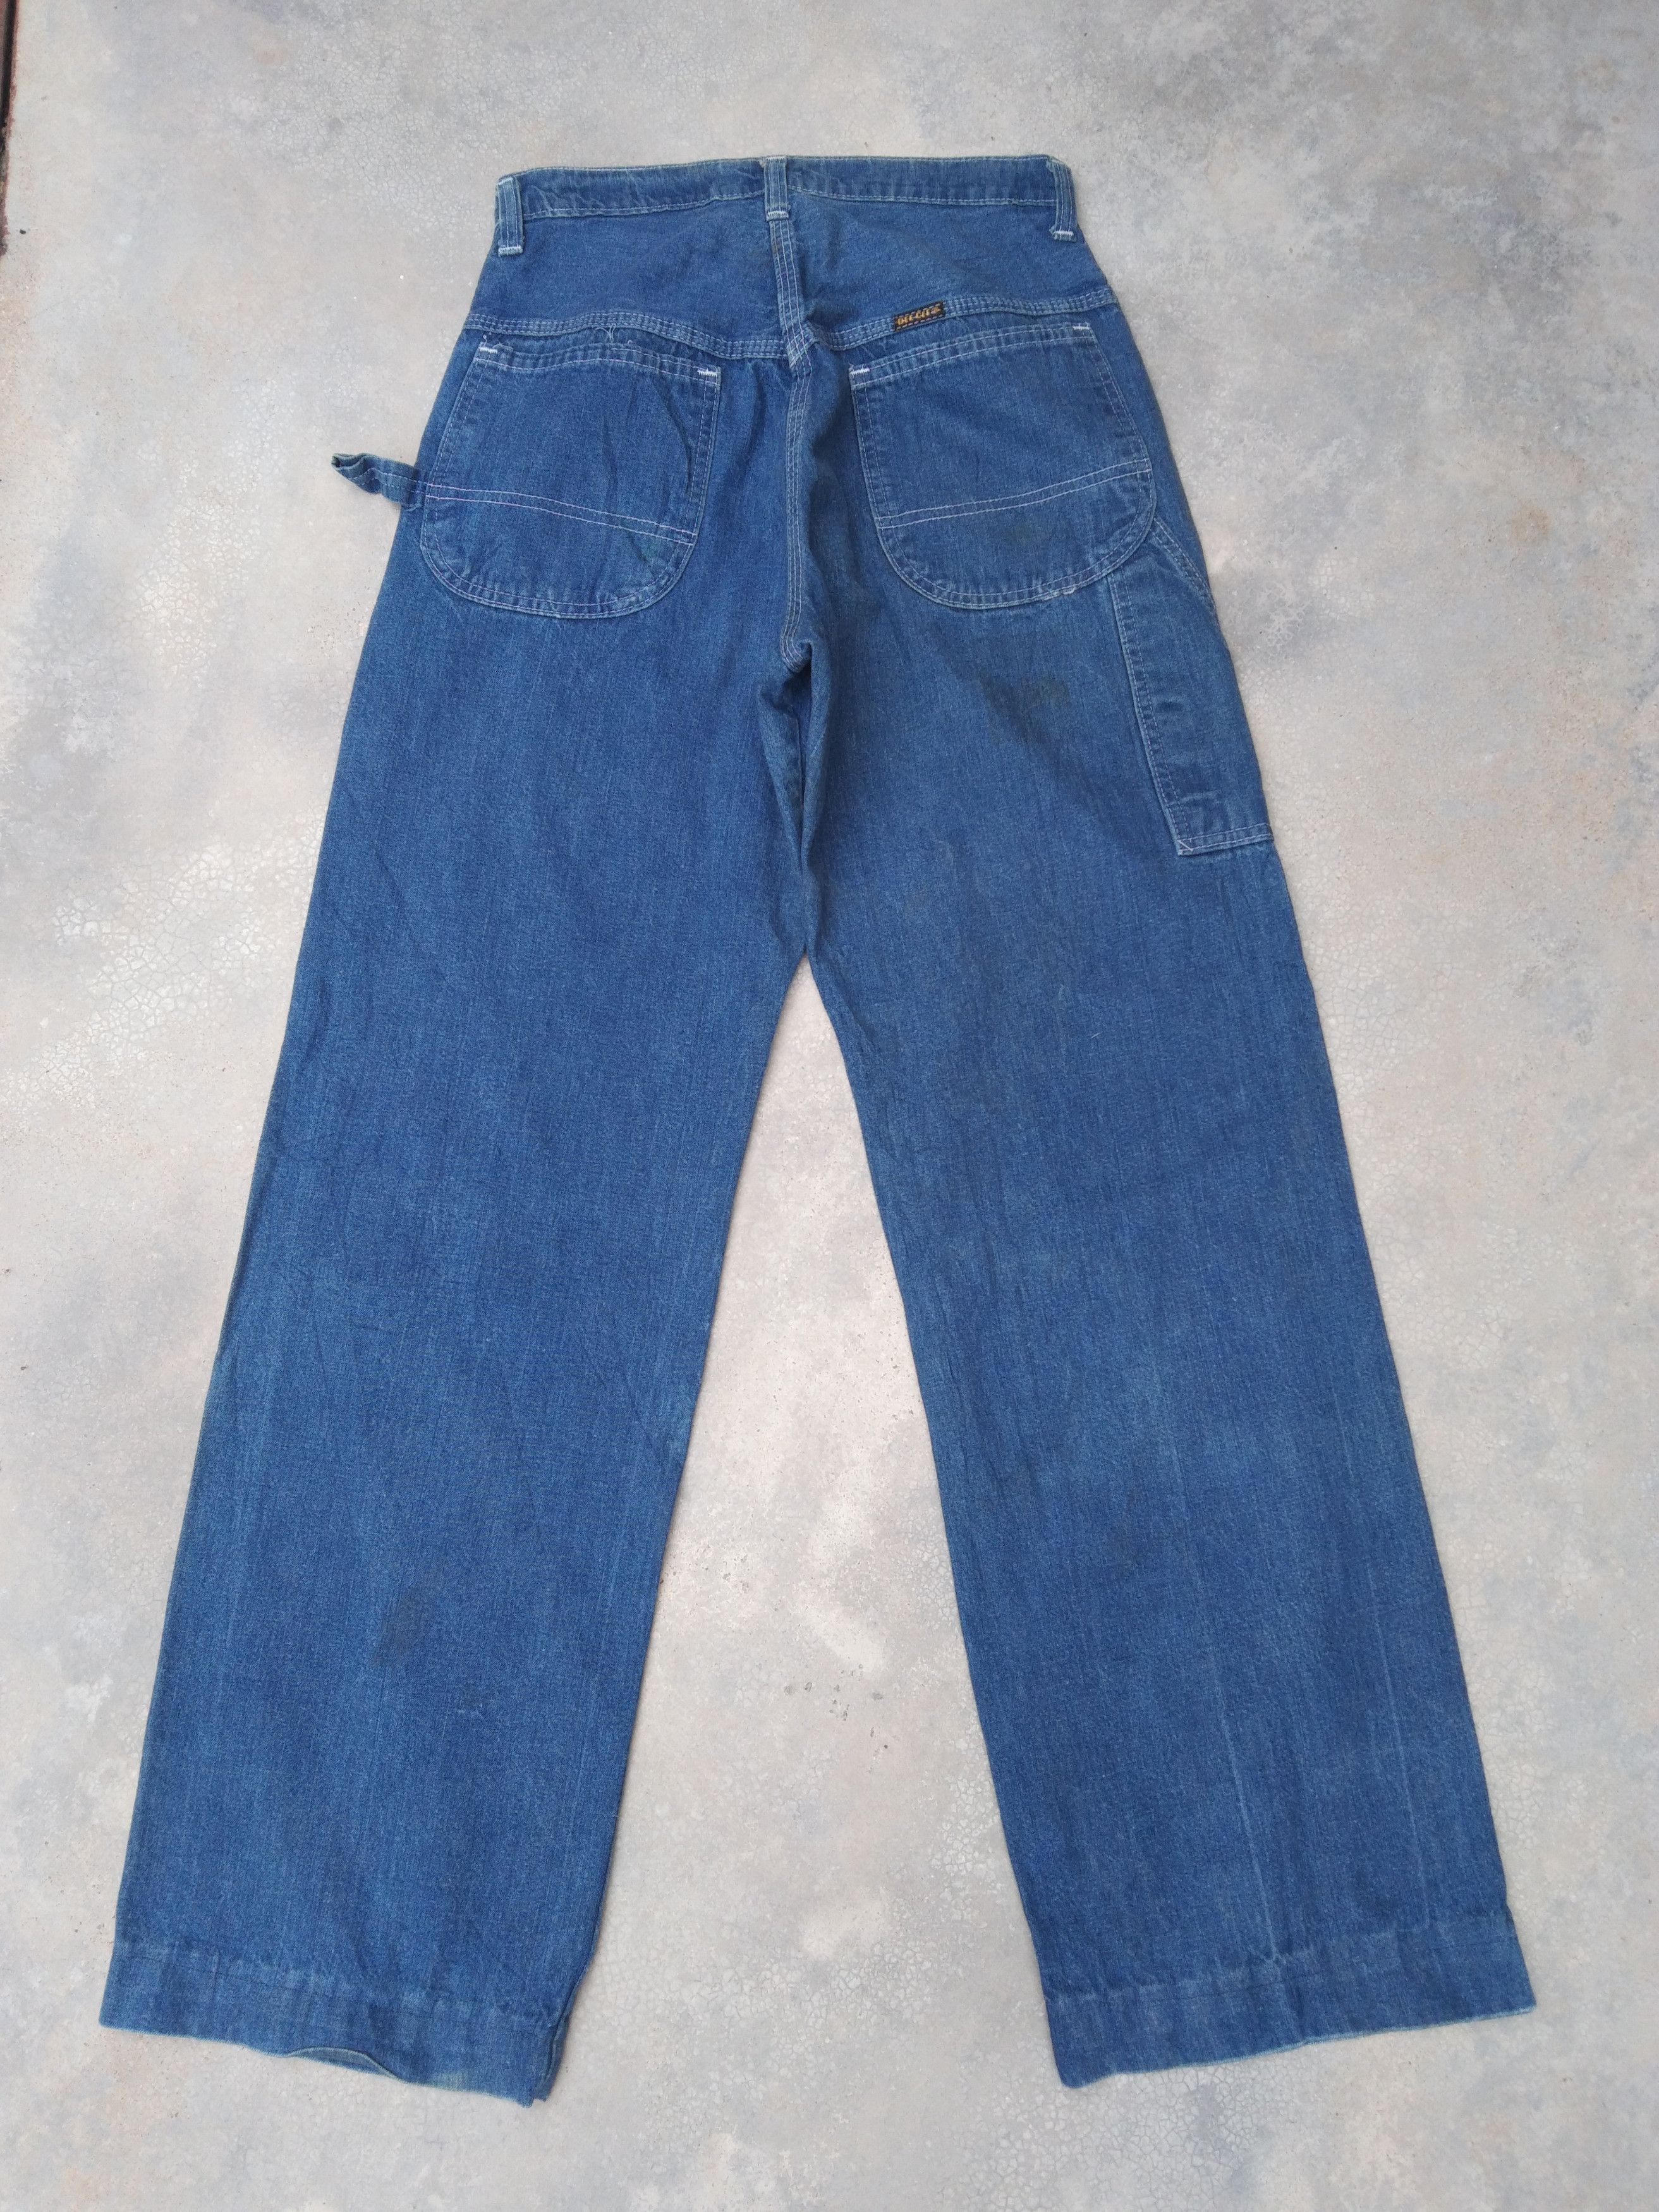 Vintage Vintage Dee Cee Carpenter Jeans Made In USA 27x31 | Grailed